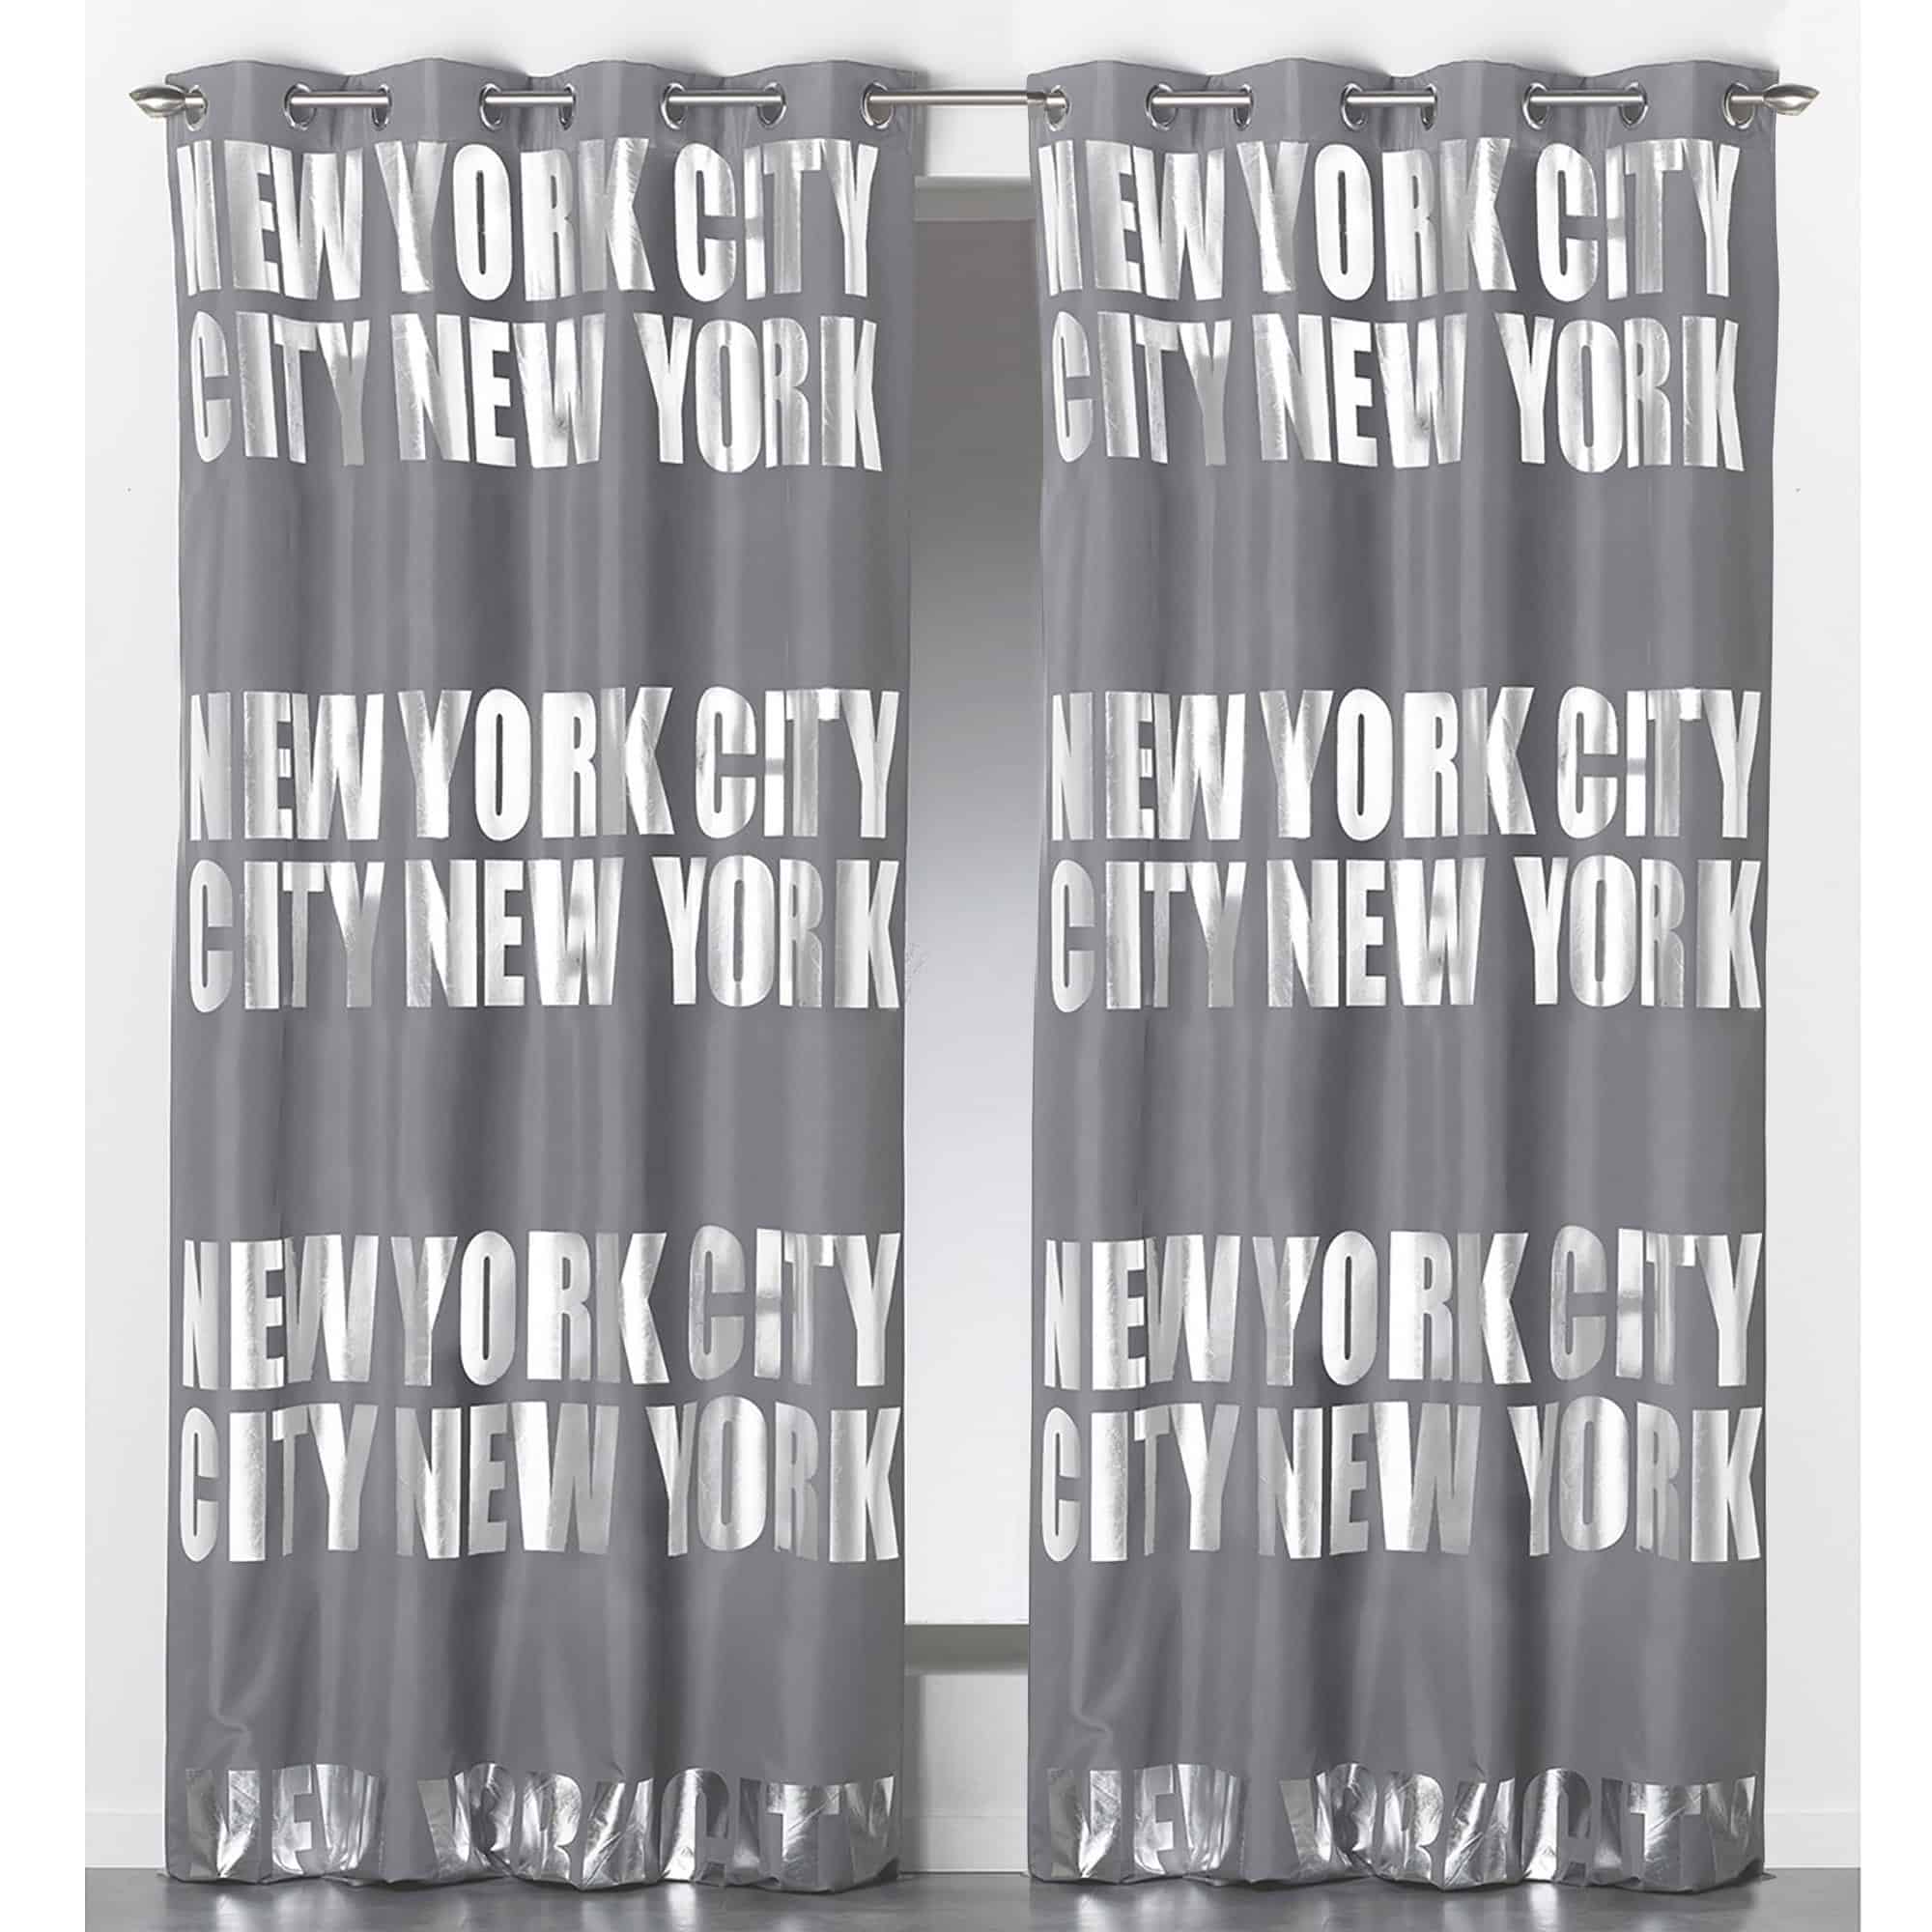 solid gray black out curtains silver NYC lettering 2 panels for large windows